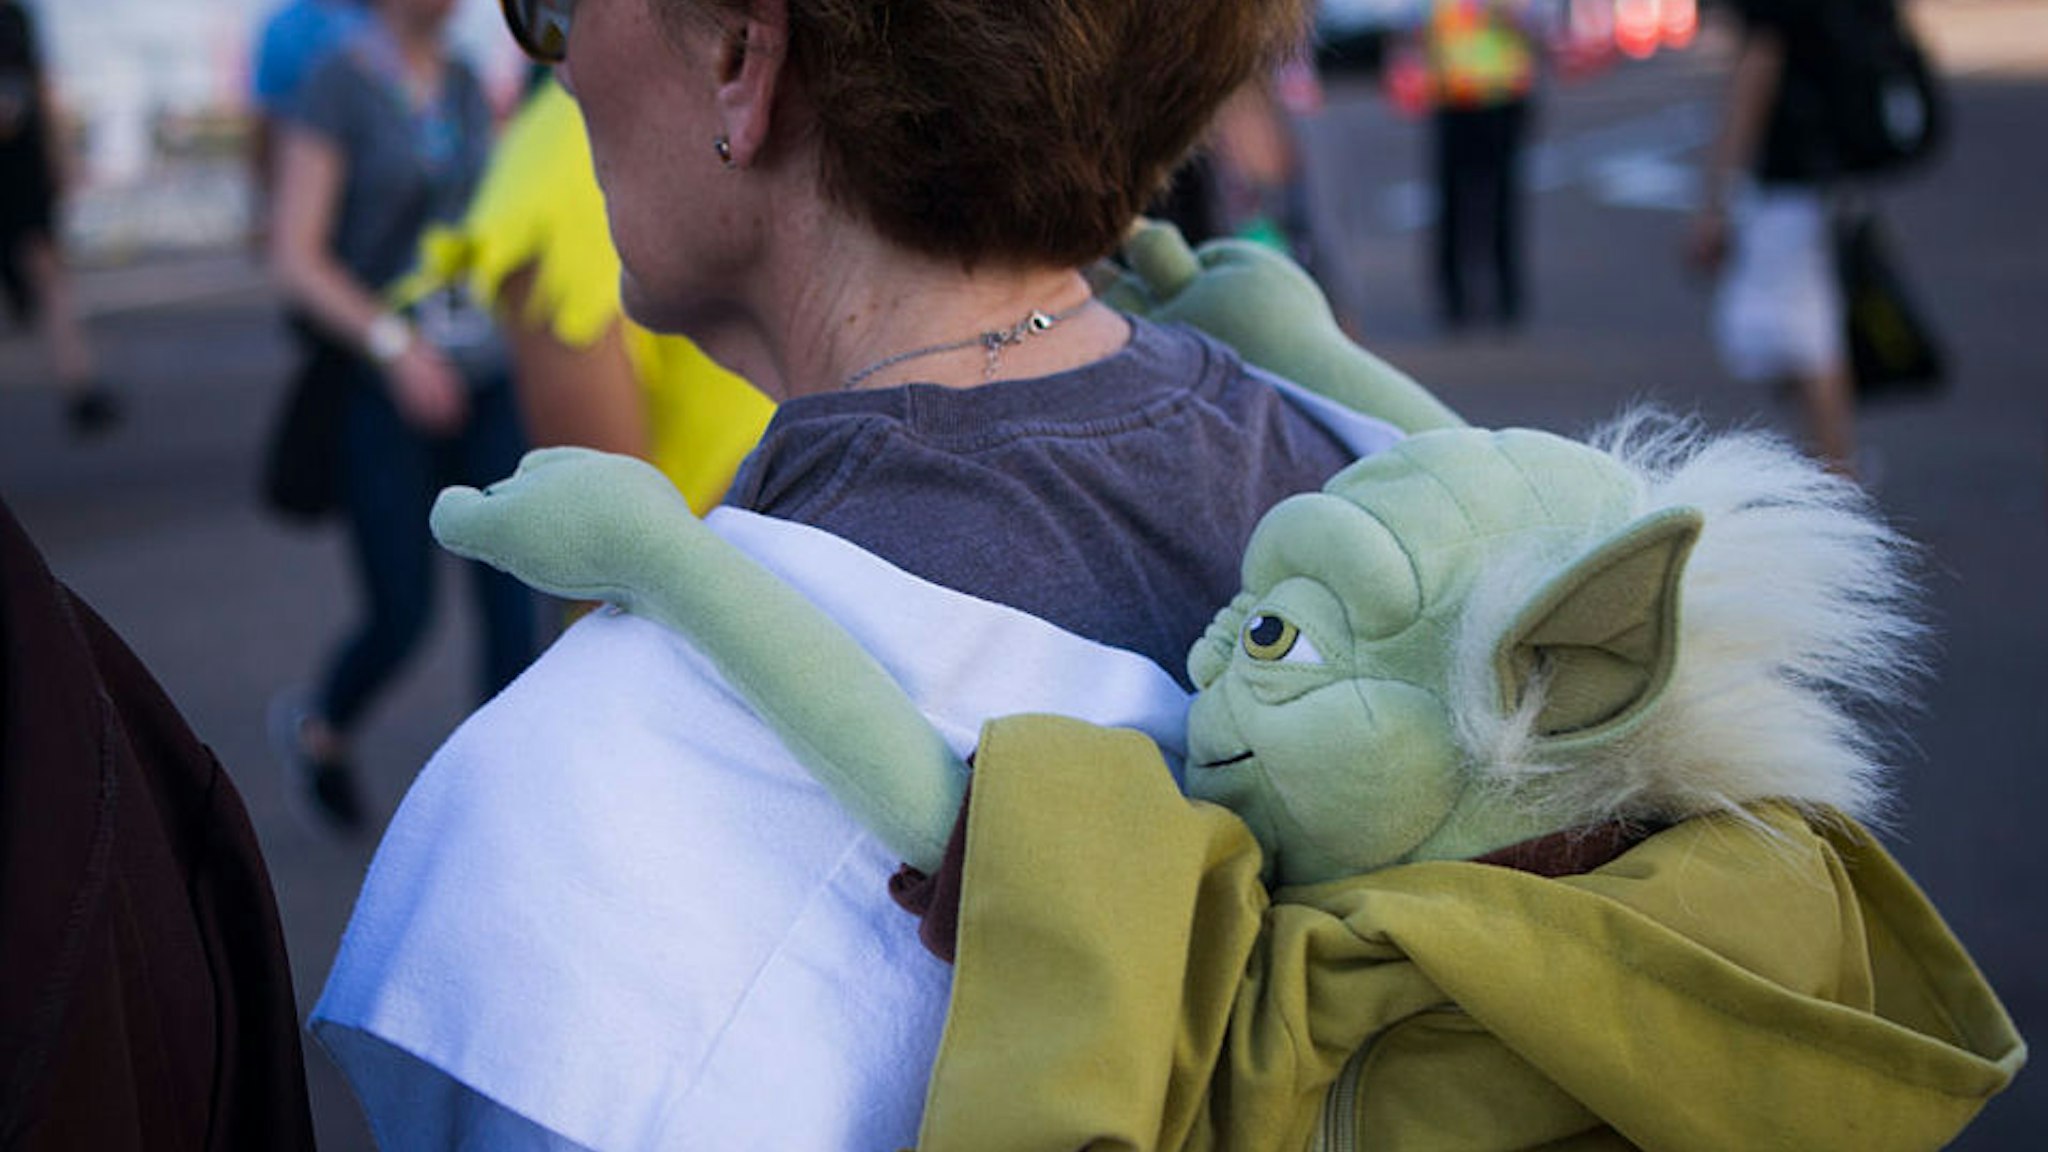 SAN DIEGO, CA --JULY 21, 2016-- A woman wears Yoda on her back during the second day of Comic-Con 2016, in San Diego, July 21, 2016.